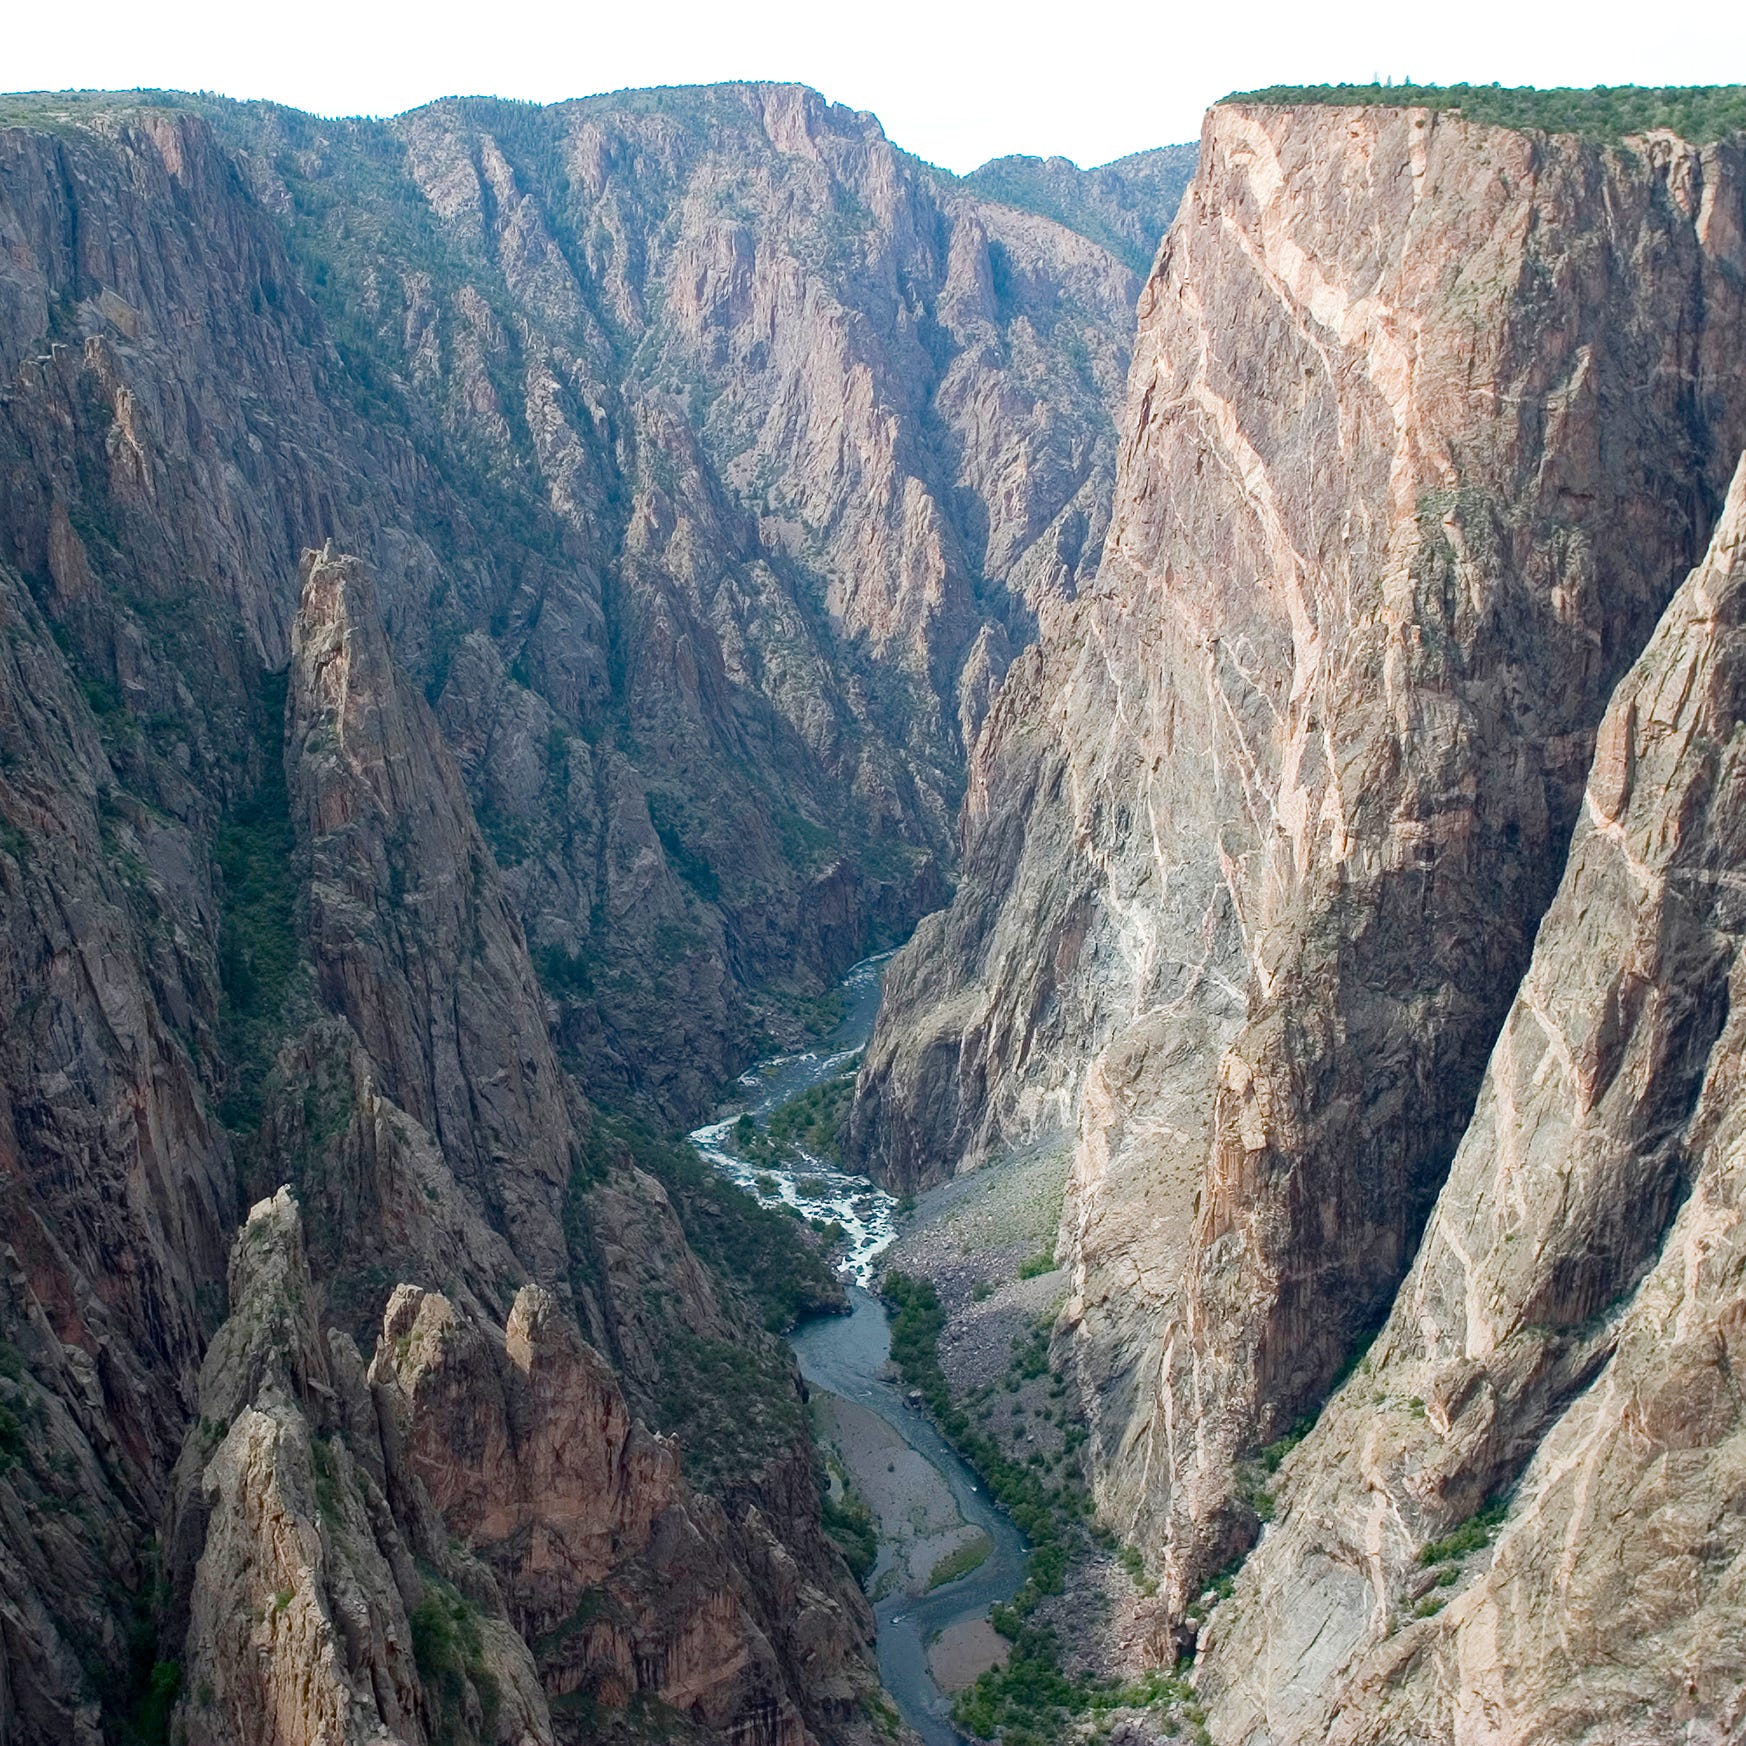 Painted Wall is seen on the right looking downstream from Chasm View at Black Canyon of the Gunnison National Park.